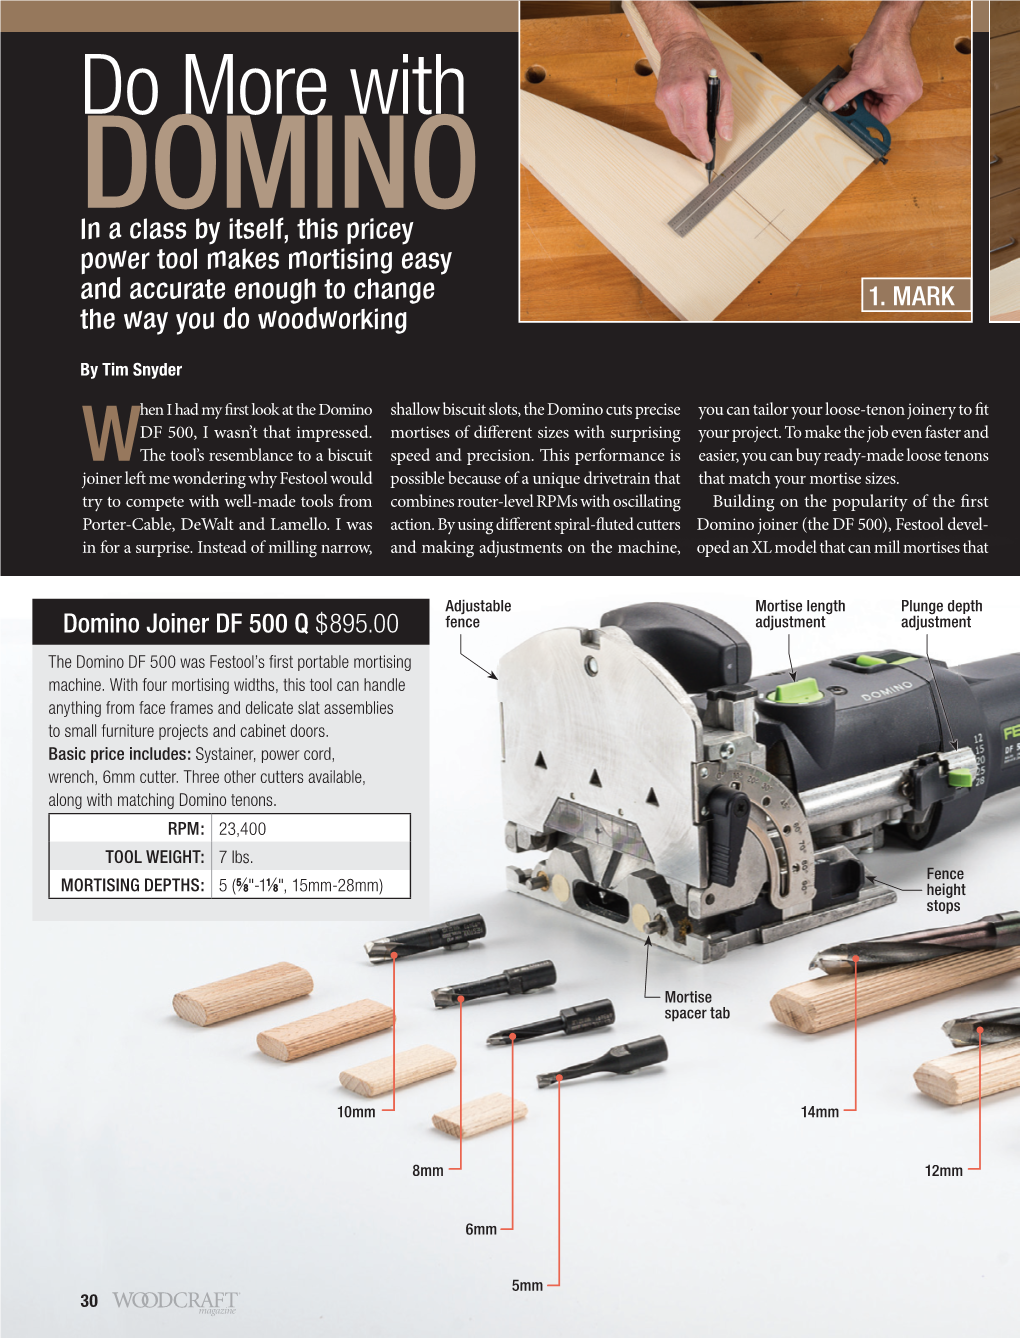 Do More with DOMINO in a Class by Itself, This Pricey Power Tool Makes Mortising Easy and Accurate Enough to Change 1